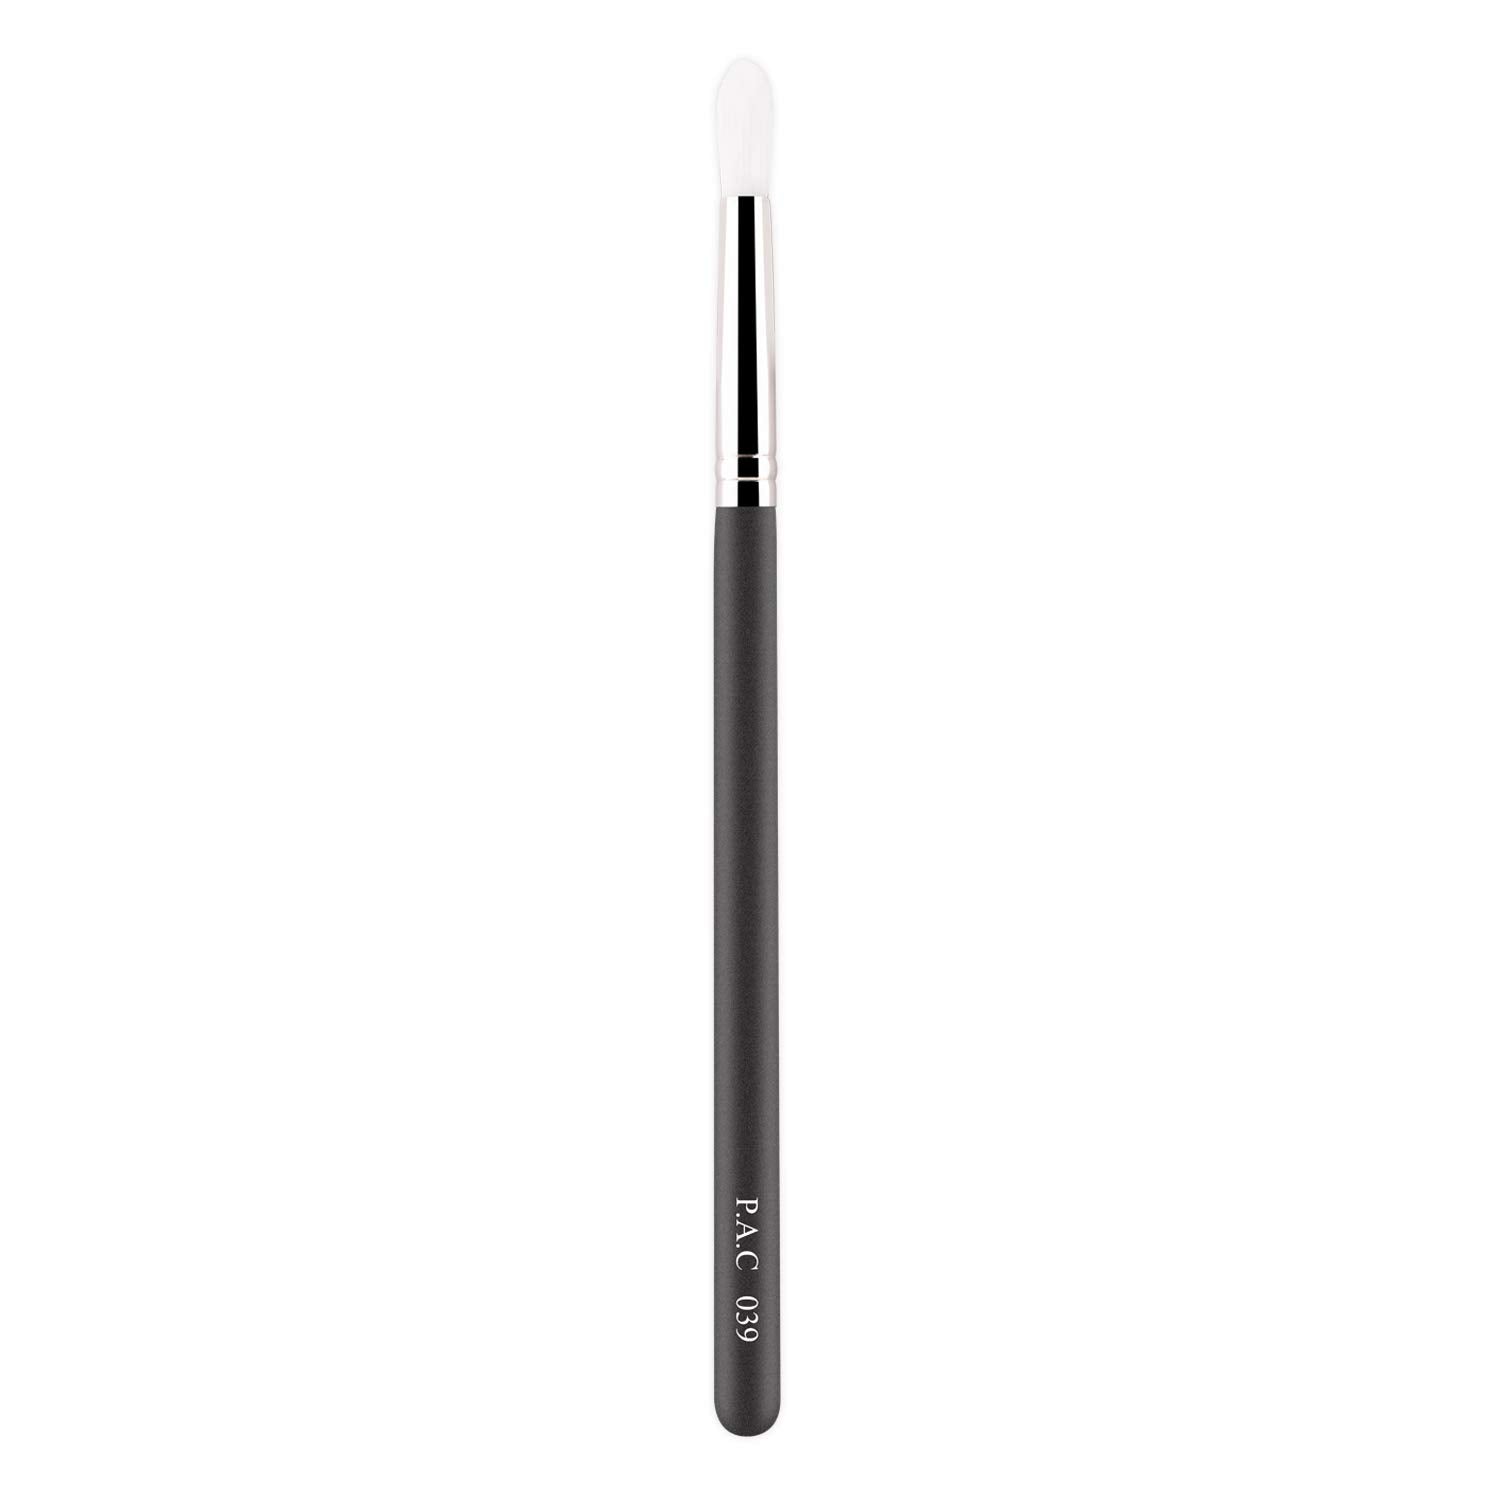 PAC Concealer Brush 039 PAC